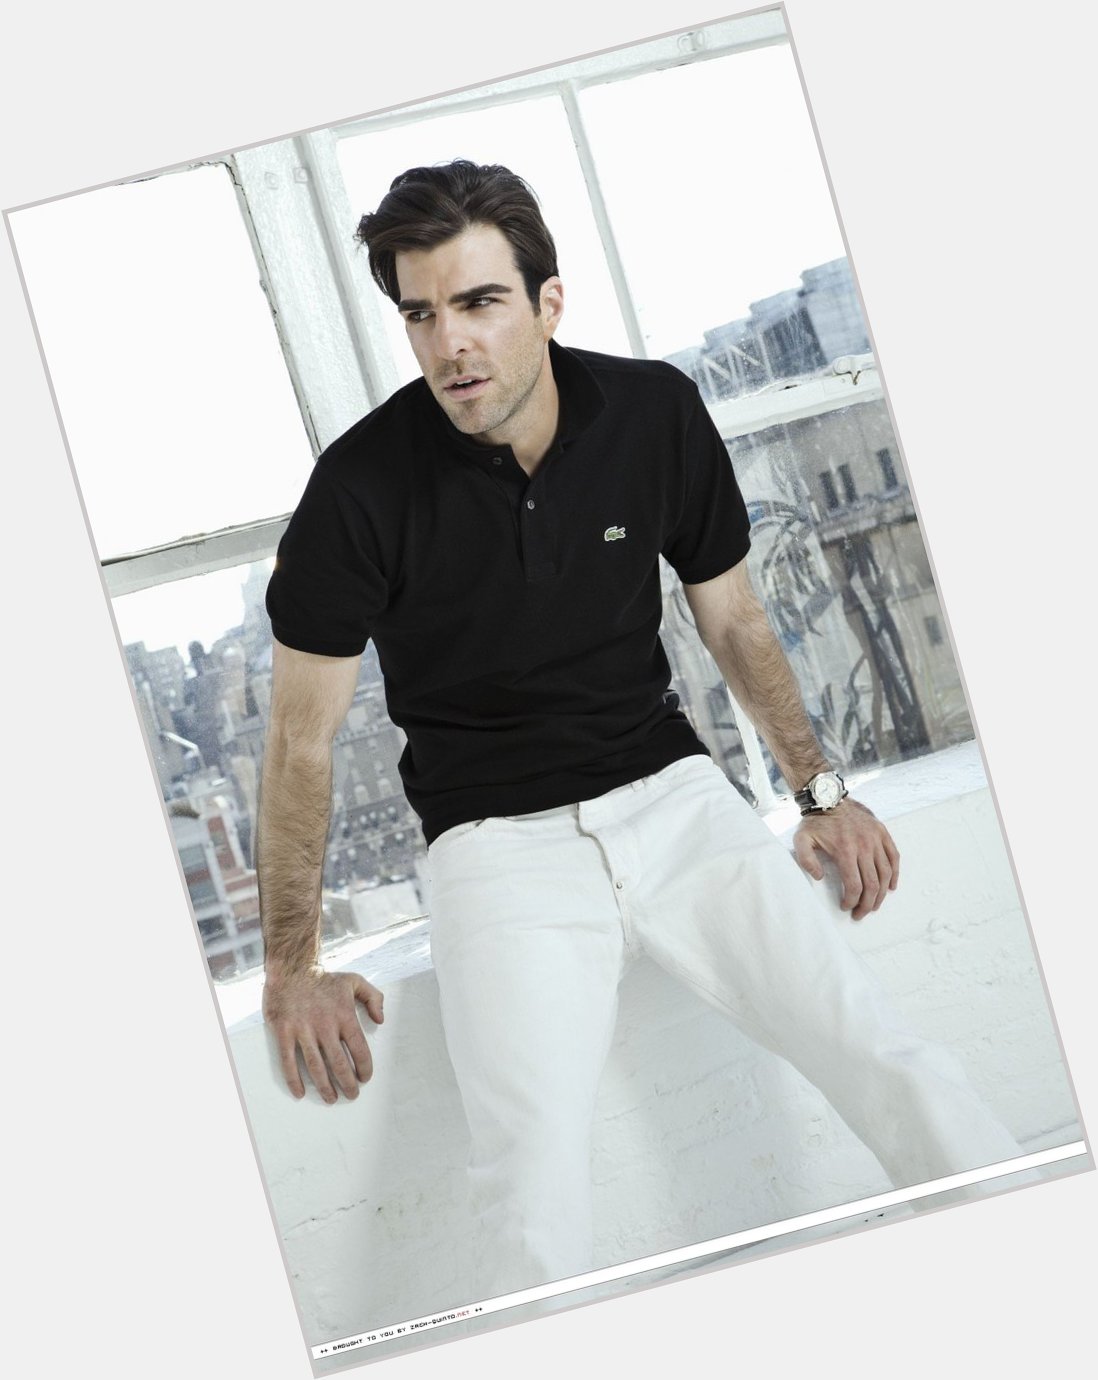 Happy 40th Birthday Zachary Quinto, you perfect human being. 